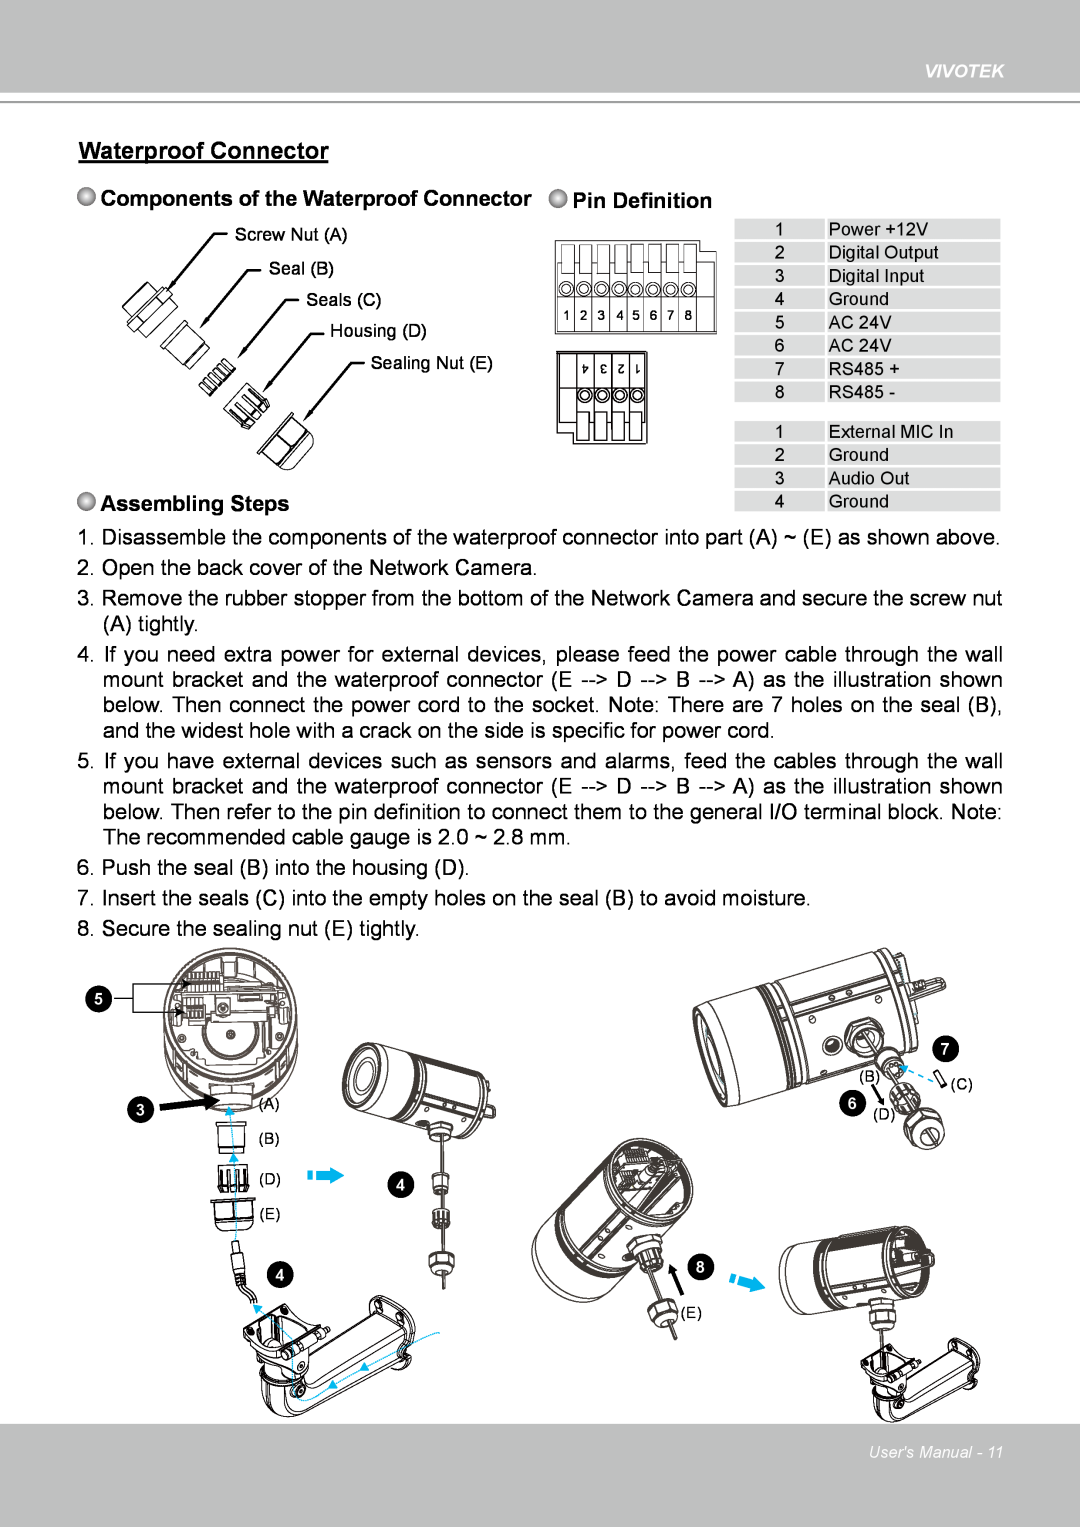 Vivotek IP8361 user manual Components of the Waterproof Connector, Pin Definition, Assembling Steps 